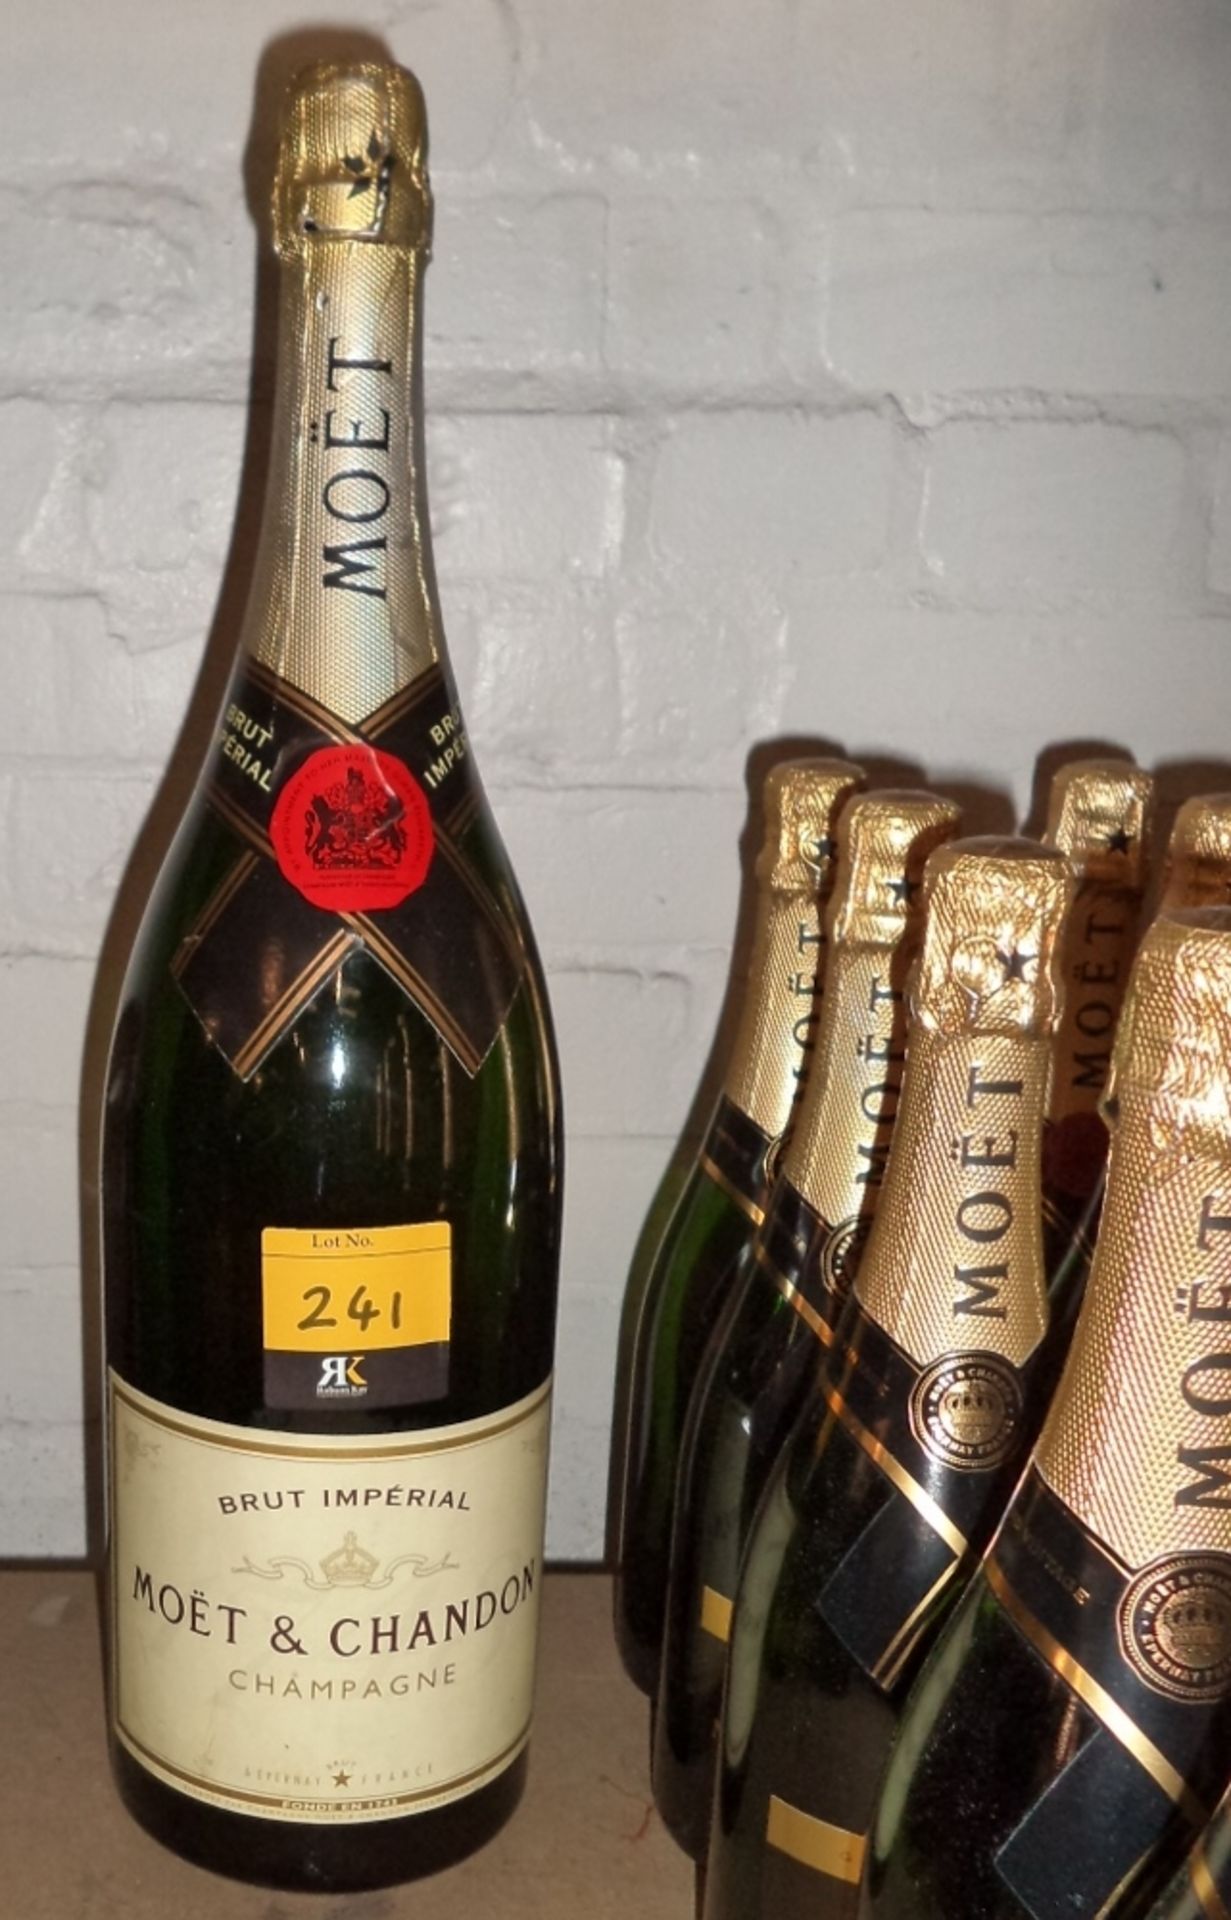 19 off Moet & Chandon Champagne dummy display bottles, including both white and rose non-vintage, - Image 3 of 4